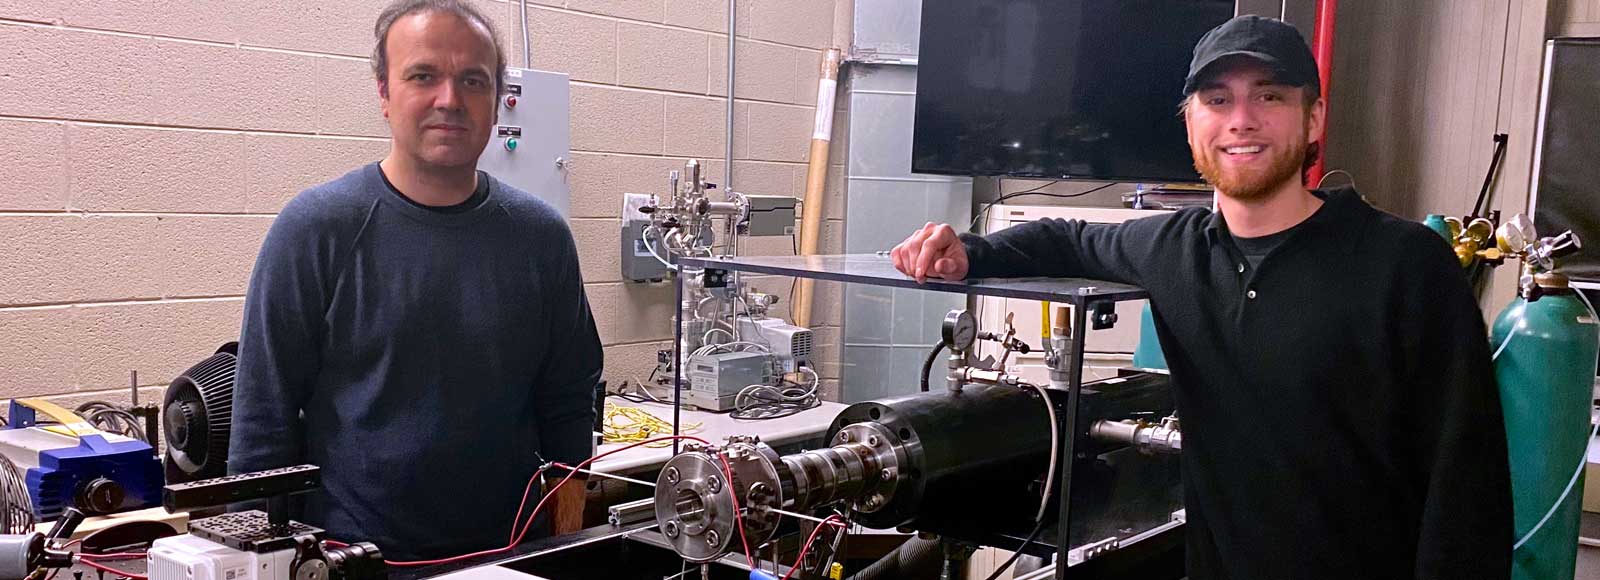 Jacob Klein and Omid Samimi in the Combustion Physics Lab